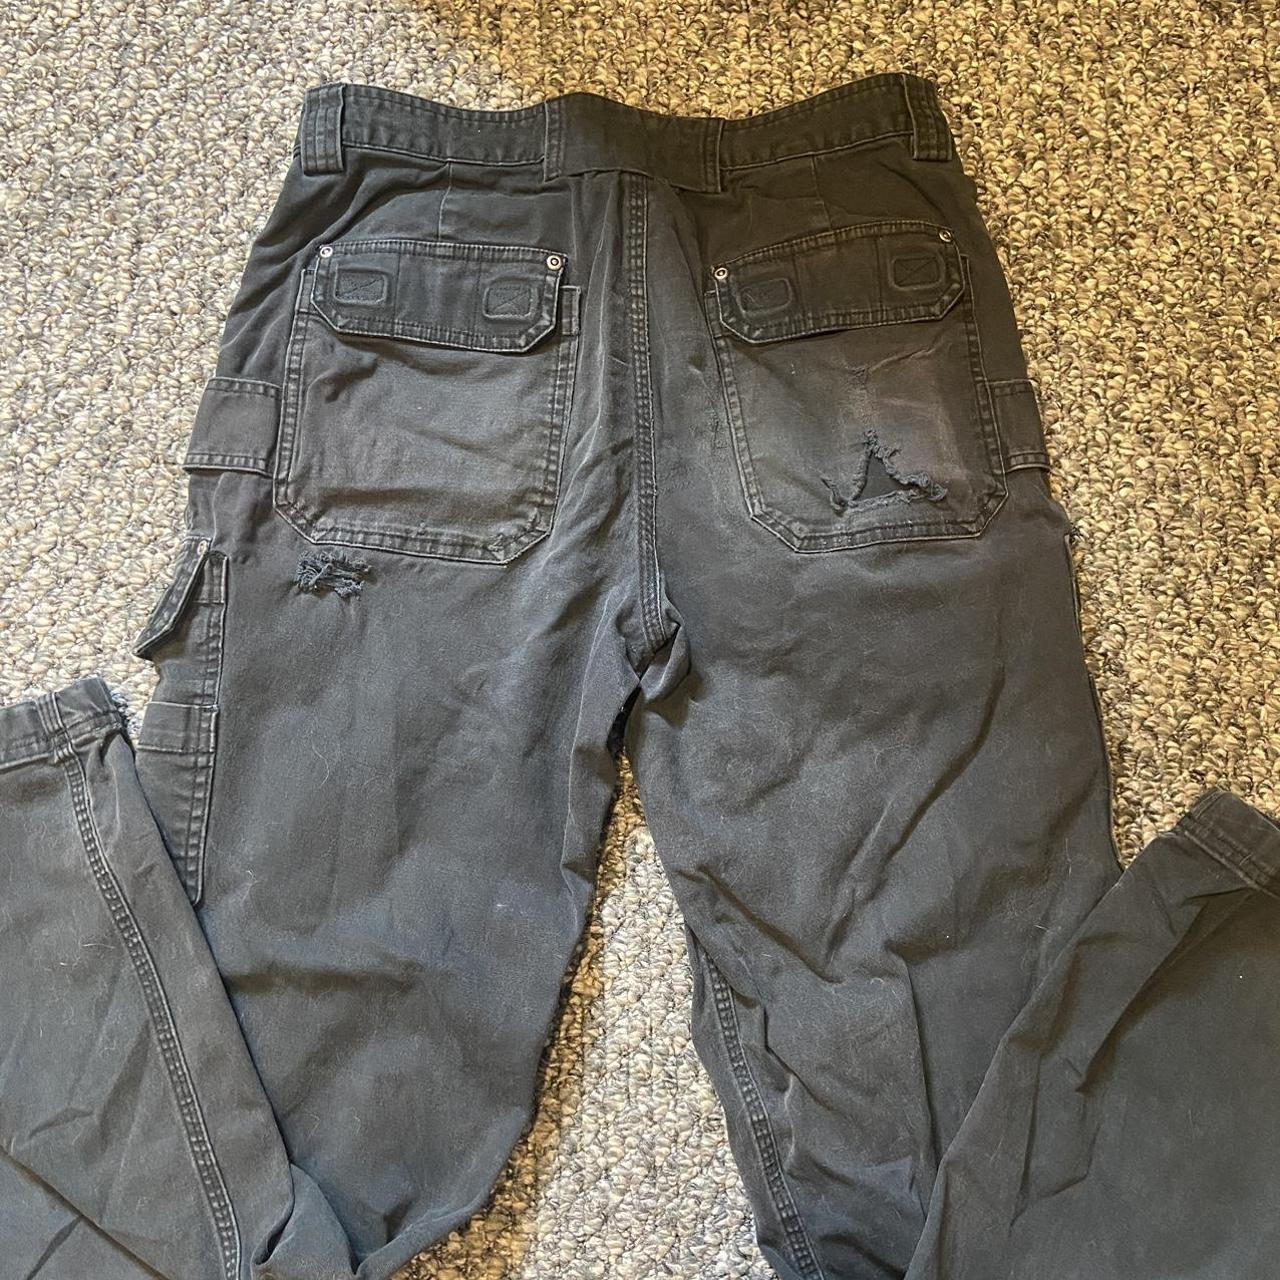 Duluth Trading Company Men's Trousers | Depop